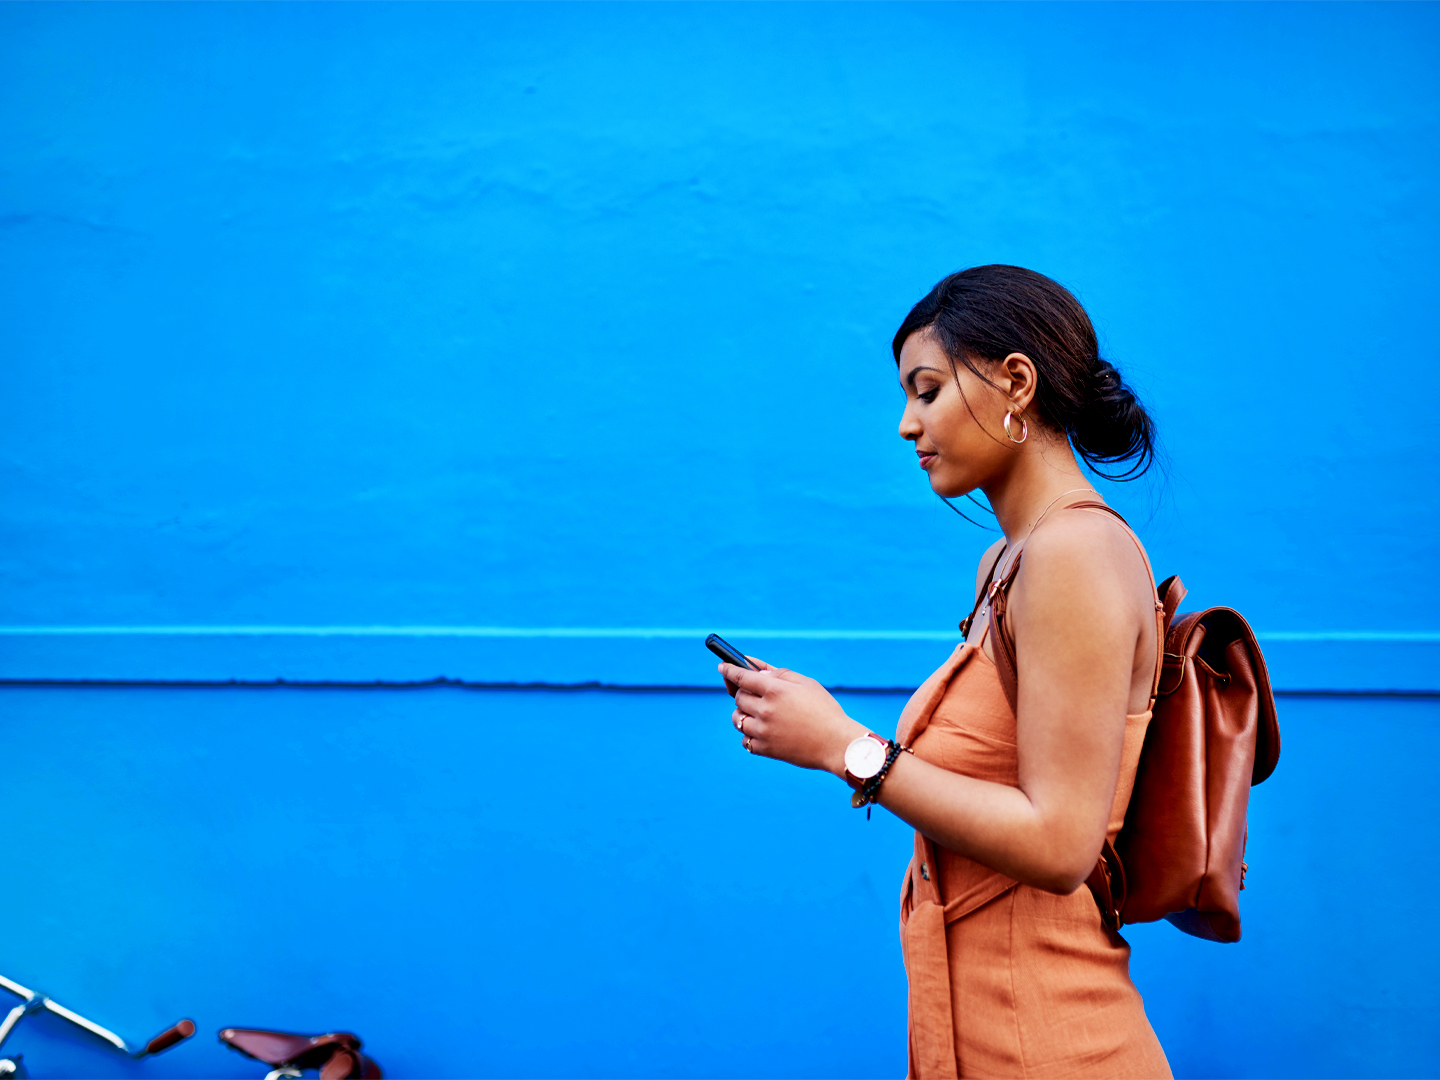 Photo of a woman using a mobile phone